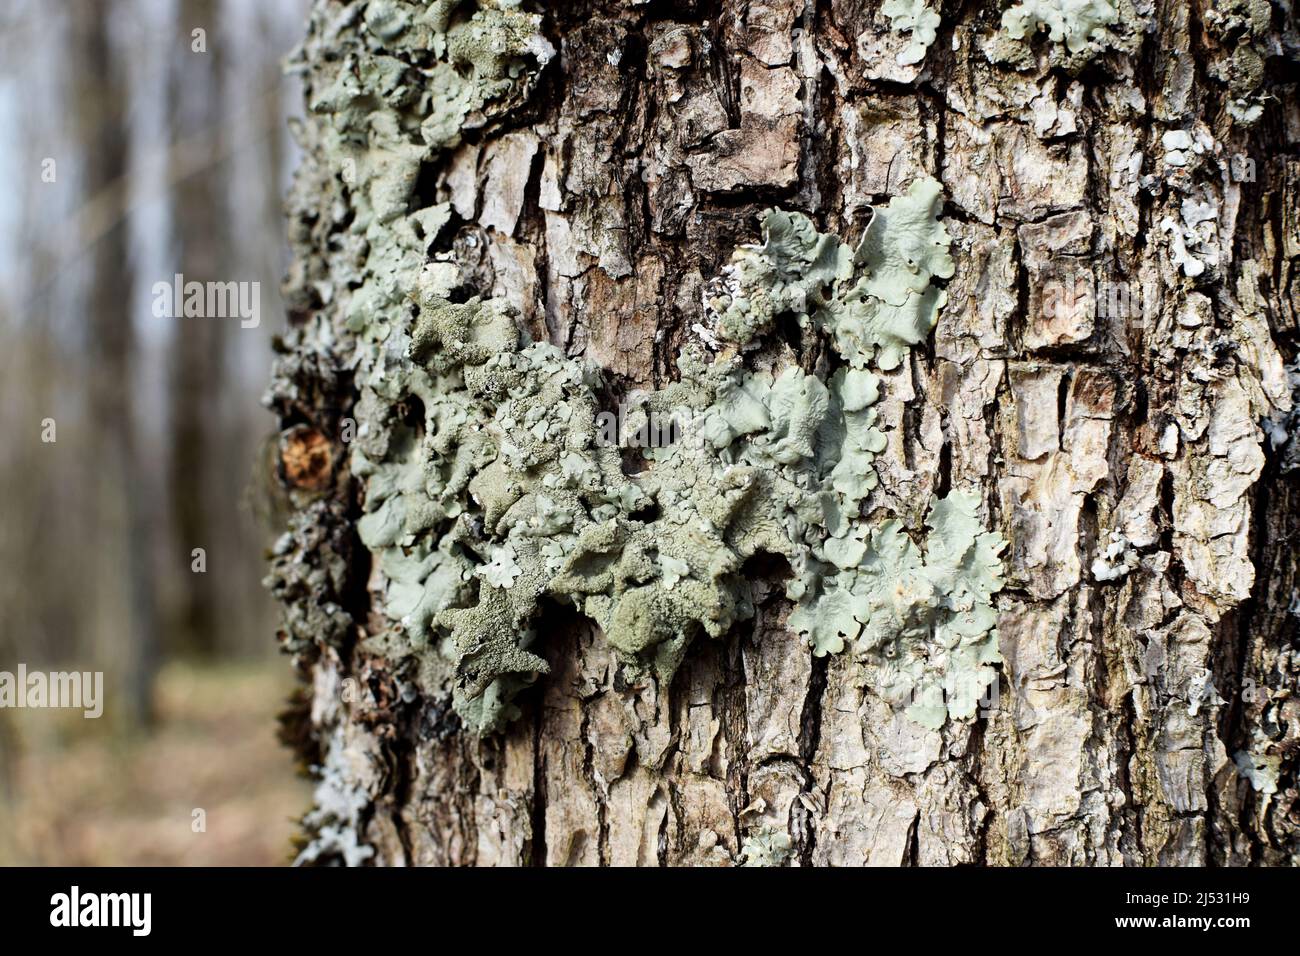 Hypogymnia physodes lichen on a tree trunk in the forest close up, selective focus Stock Photo